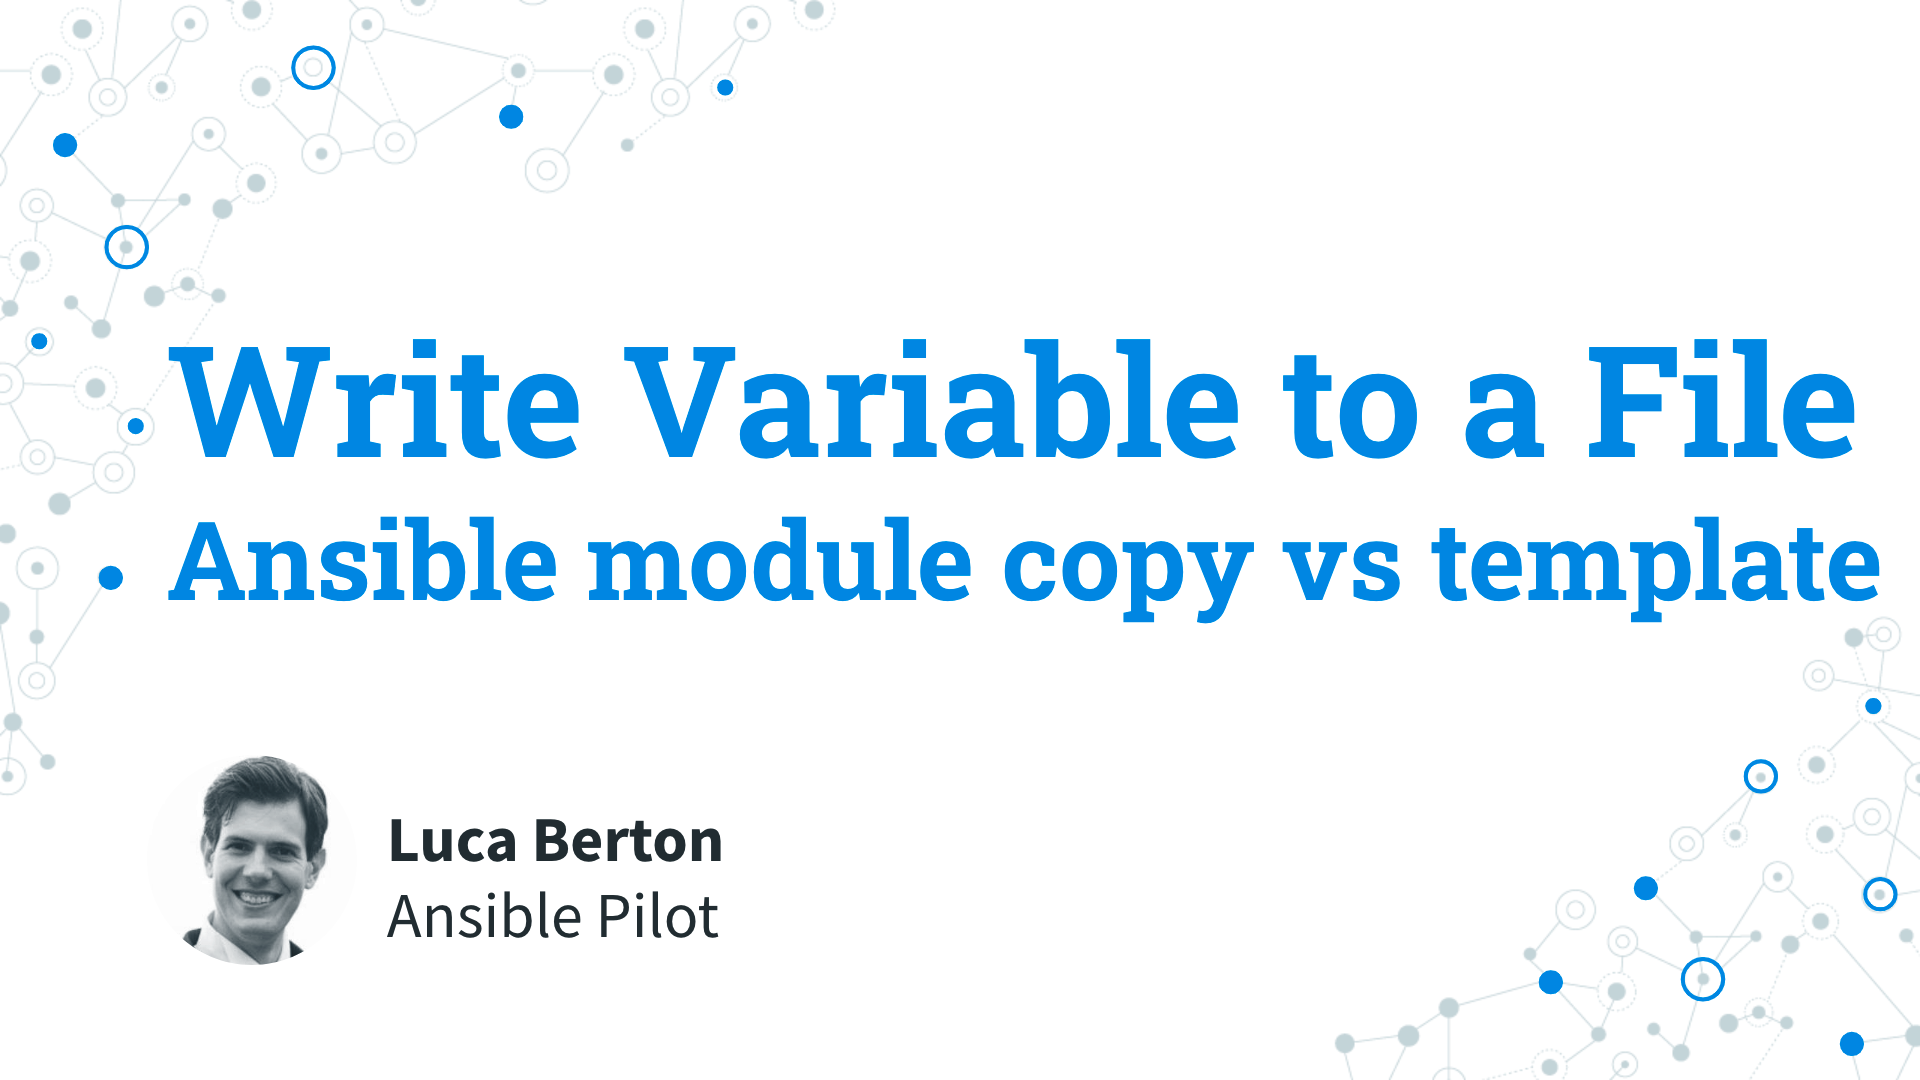 Write a Variable to a File - Ansible module copy vs template